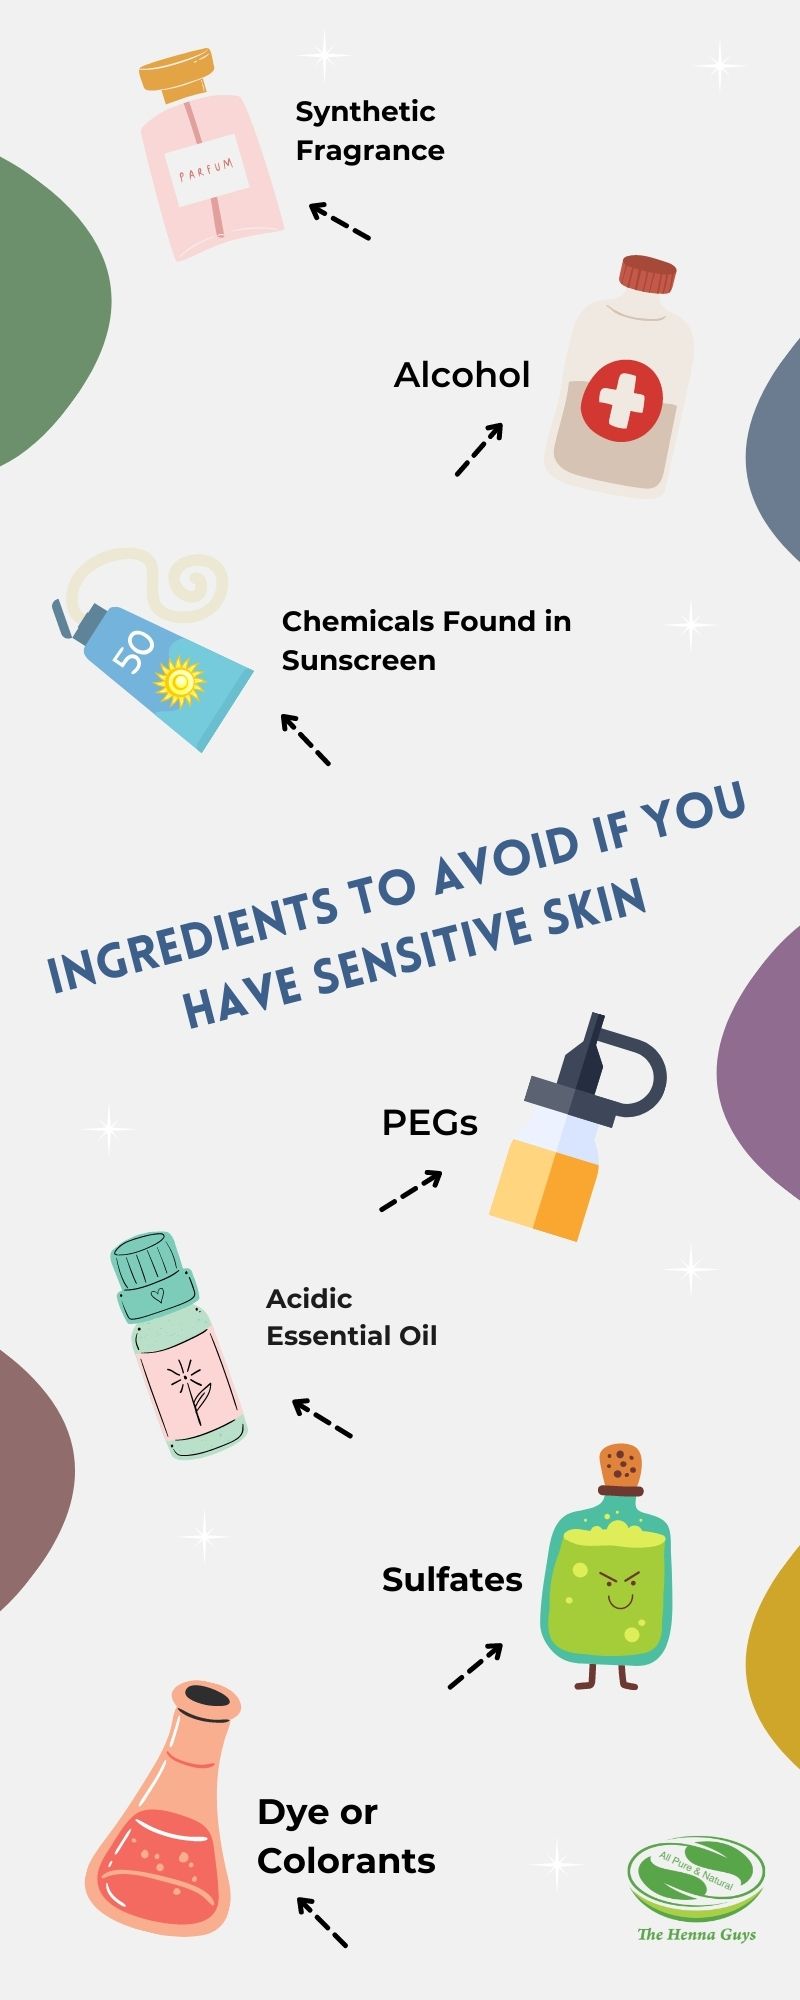 Ingredients to avoid if you have sensitive skin